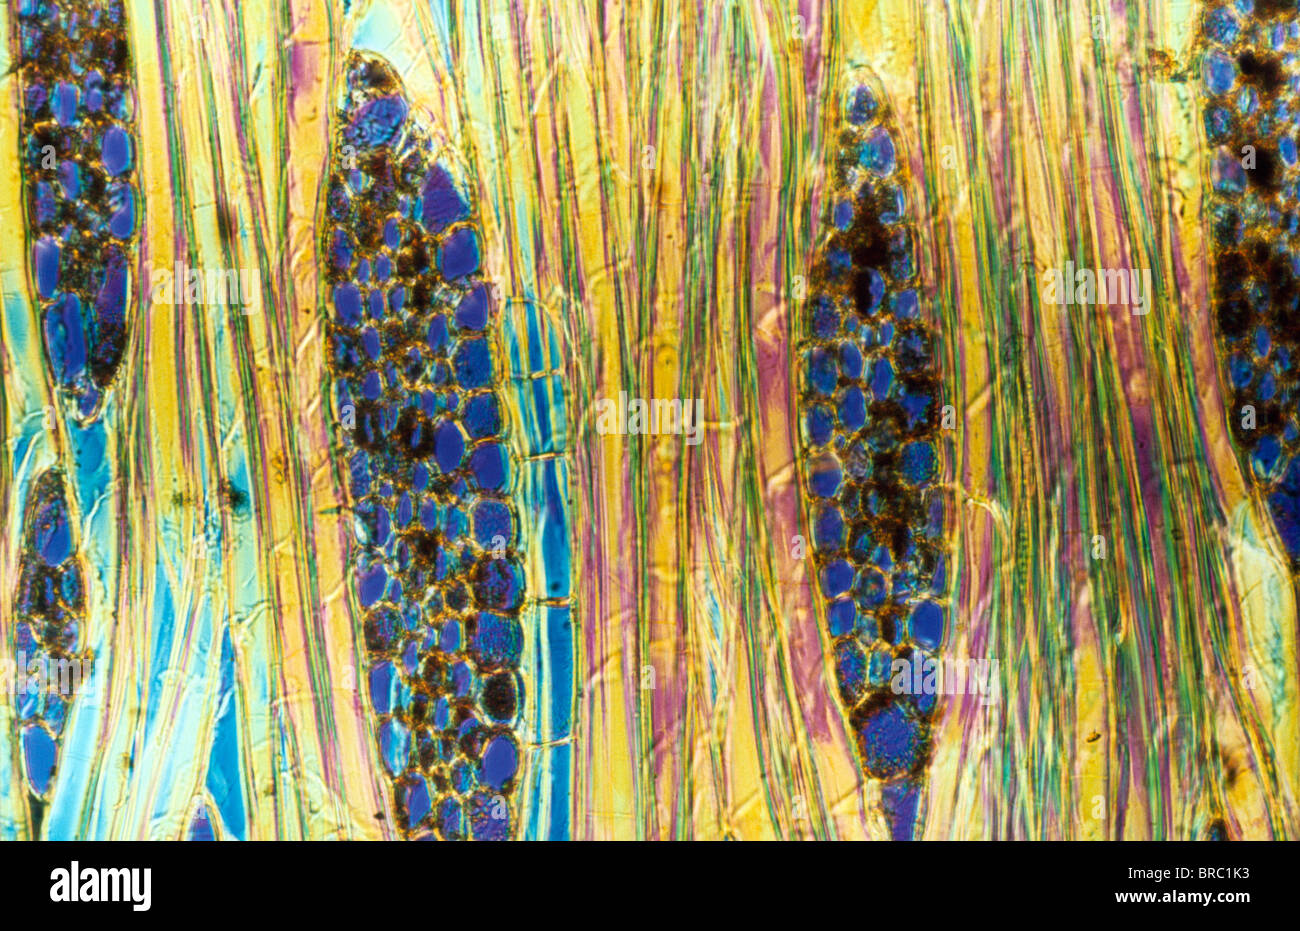 Light Micrograph (LM) of a longitudinal section showing xylem elements of Mahogany wood (Pinus sylvestris), magnification x600 Stock Photo